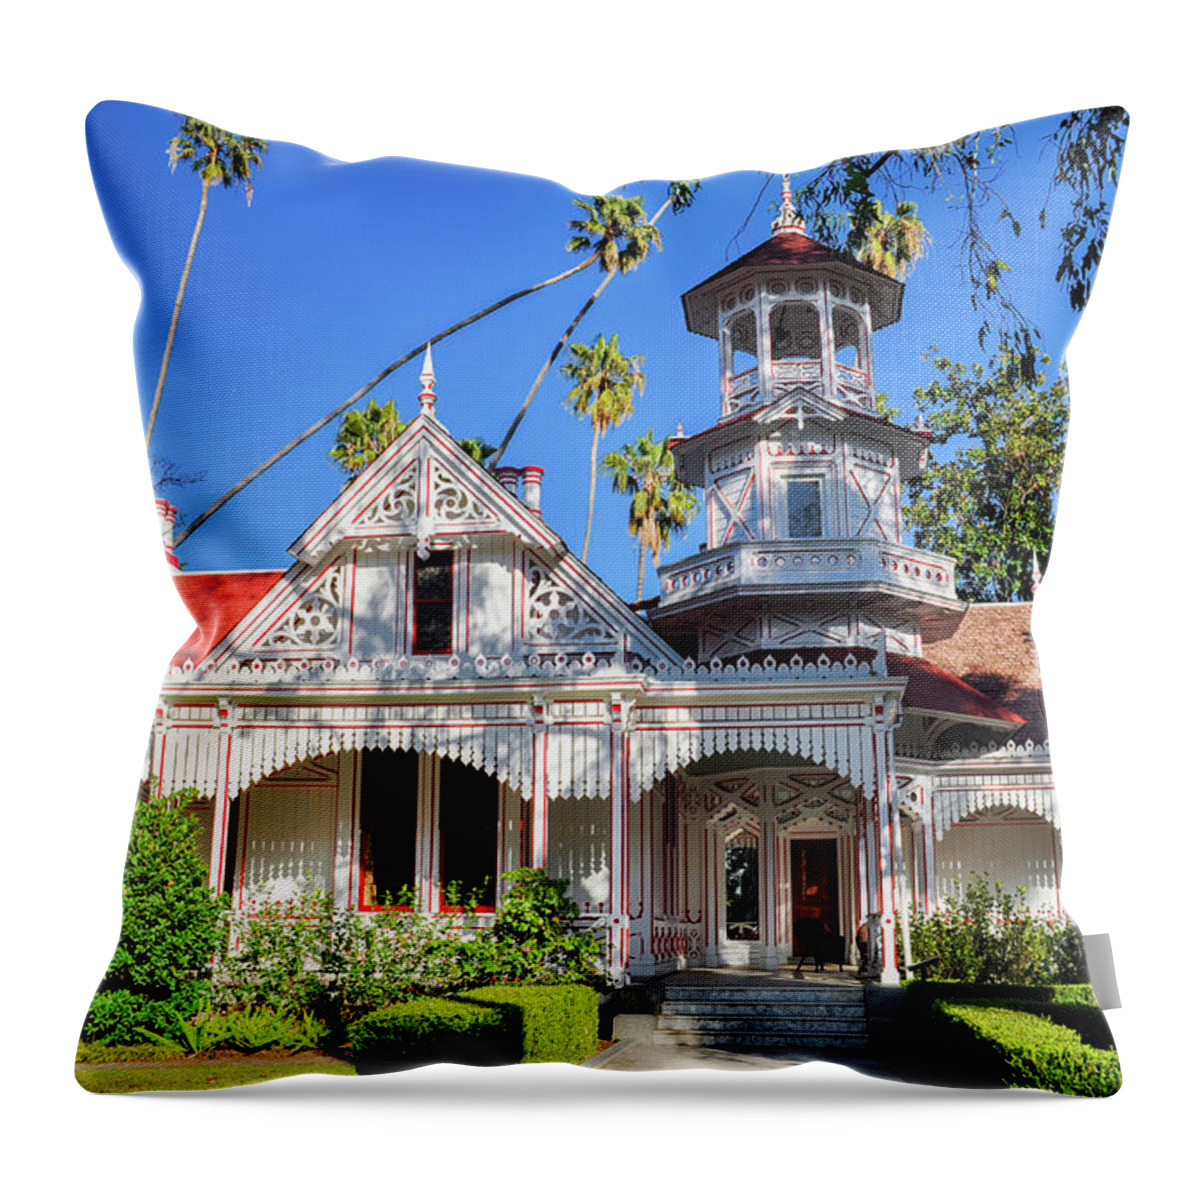 Queen Anne Cottage Throw Pillow featuring the photograph Los Angeles Queen Anne Cottage by Kyle Hanson